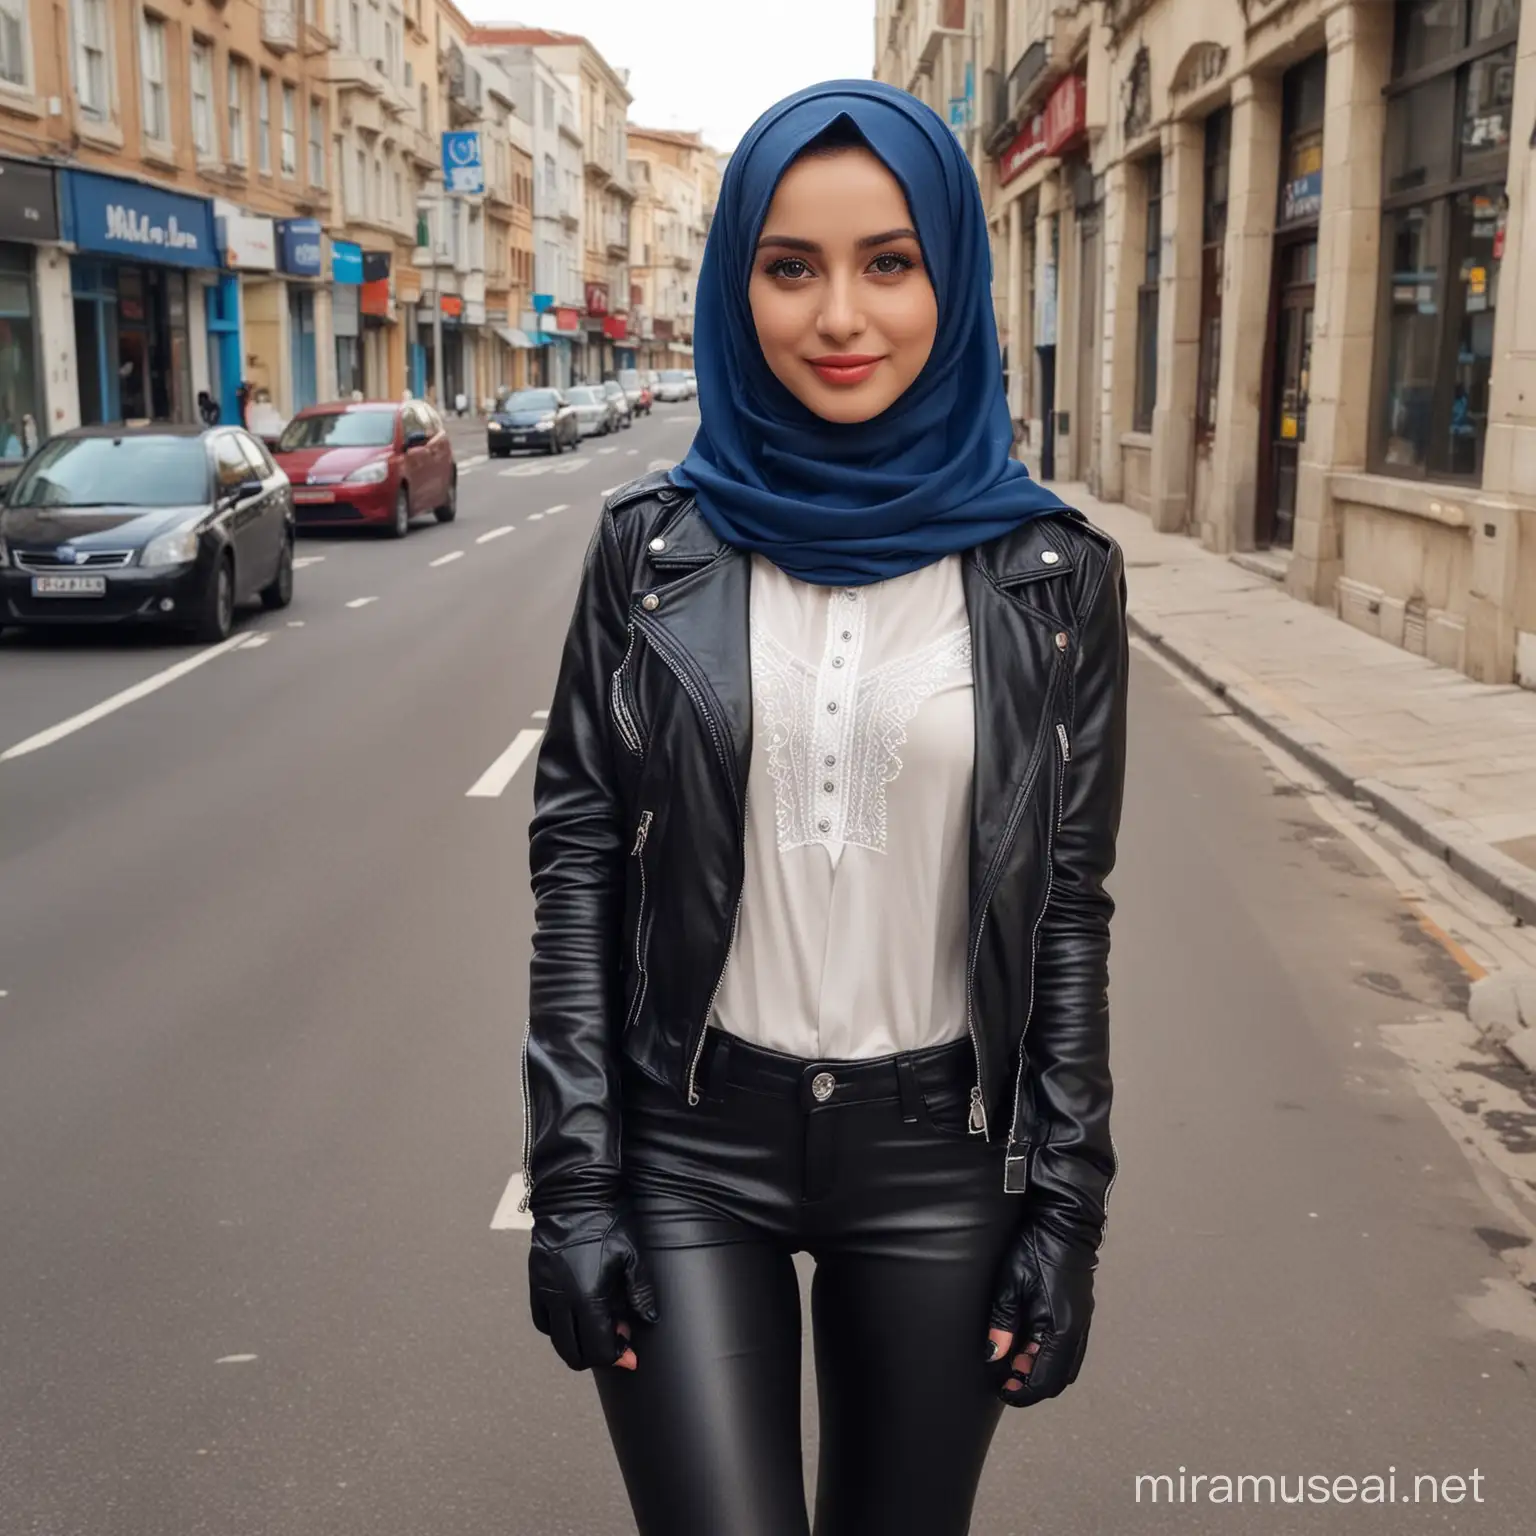 Elegant Muslimah in Traditional Hijab with Modern Street Style